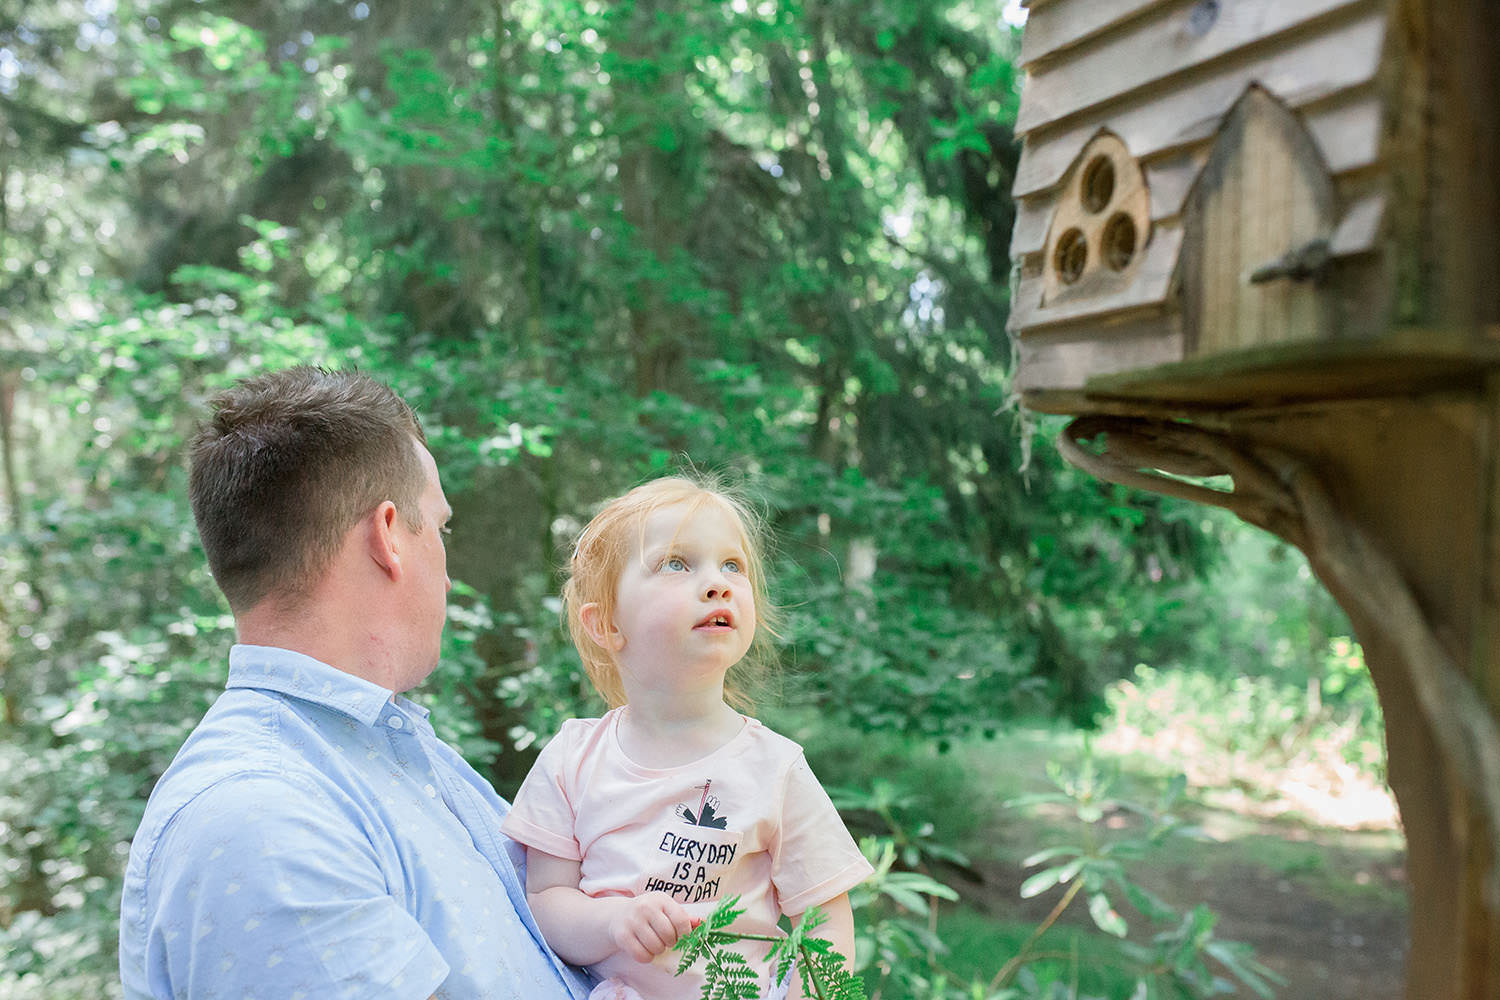 A small child looking in wonder at a fairy house.